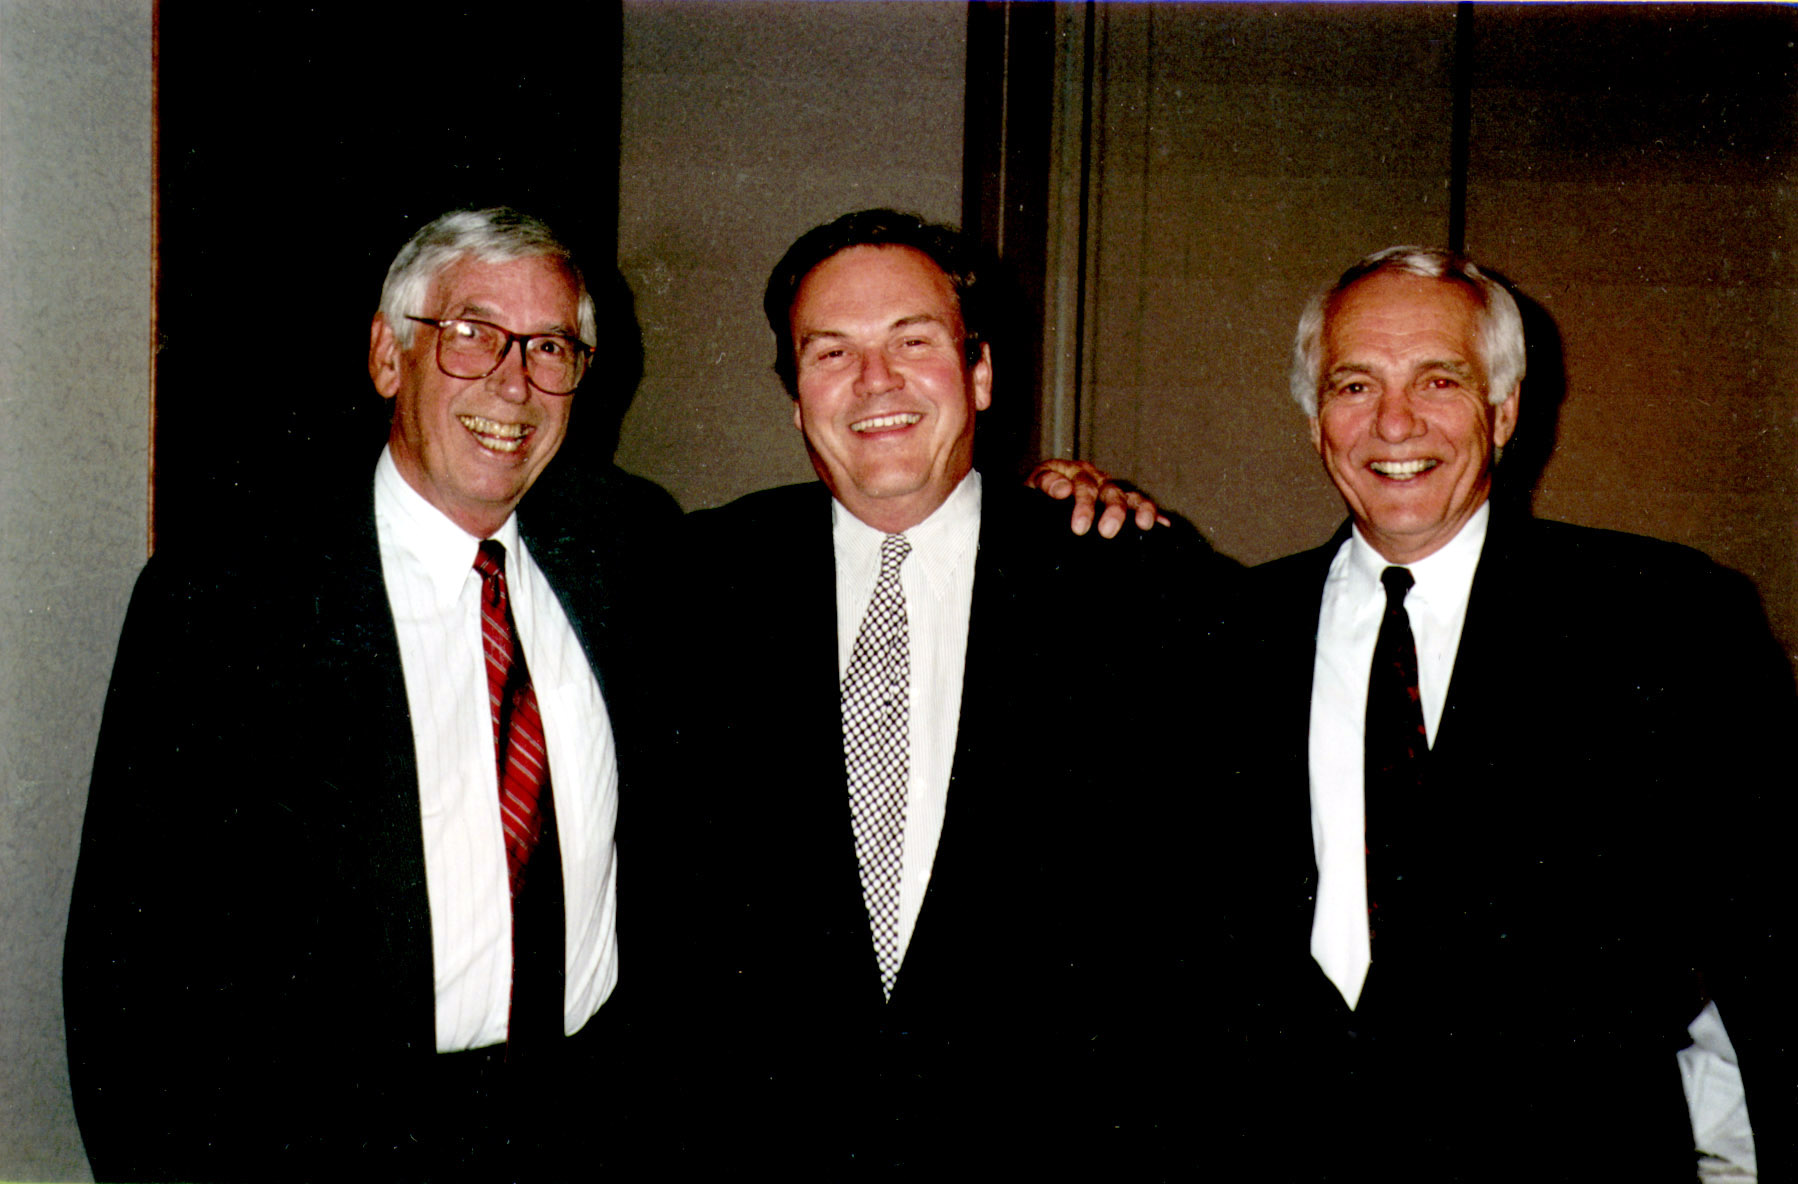 Three McMaster family medicine chairs pictured here in 1999 at the first Carl Moore Lectureship are from left to right: Ron McCauley, Walter Rosser and Carl Moore.